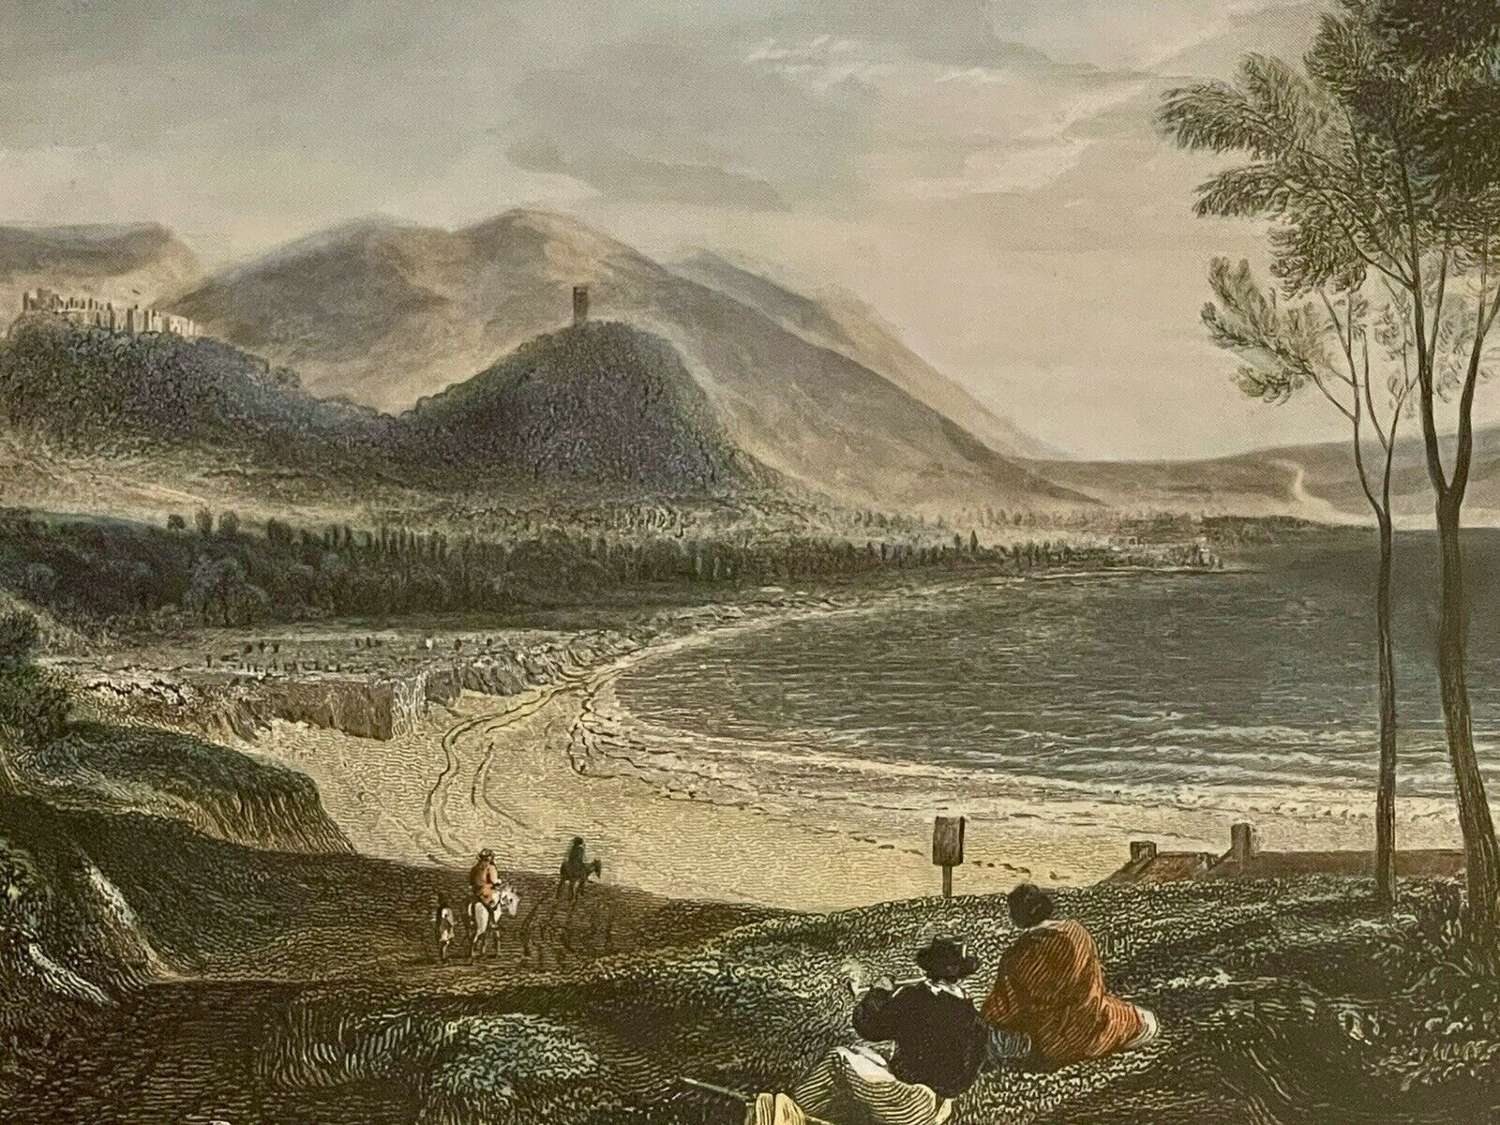 Turner engraving of Minehead and Dunster